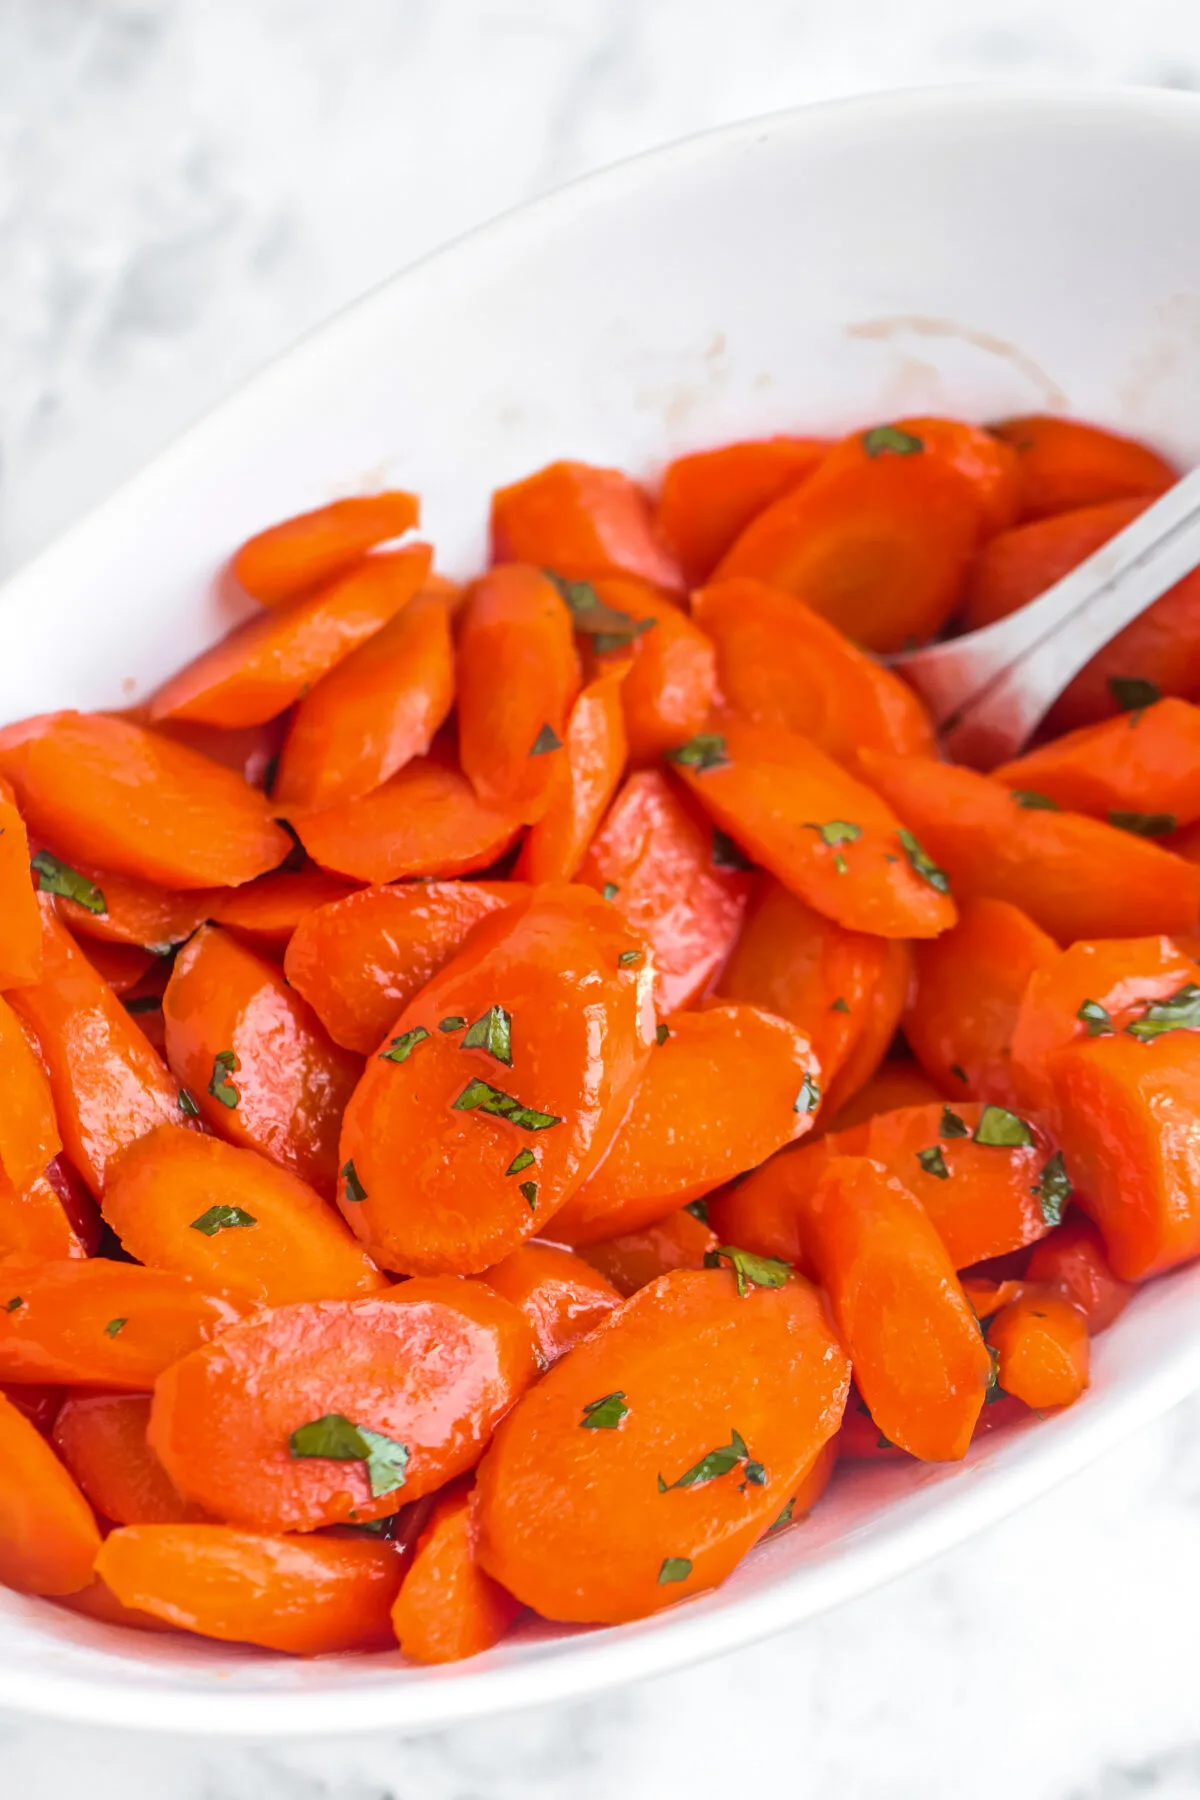 A simple and classic side dish, this easy brown sugar glazed carrots recipe is perfect for holiday dinners or just a tasty weeknight meal.